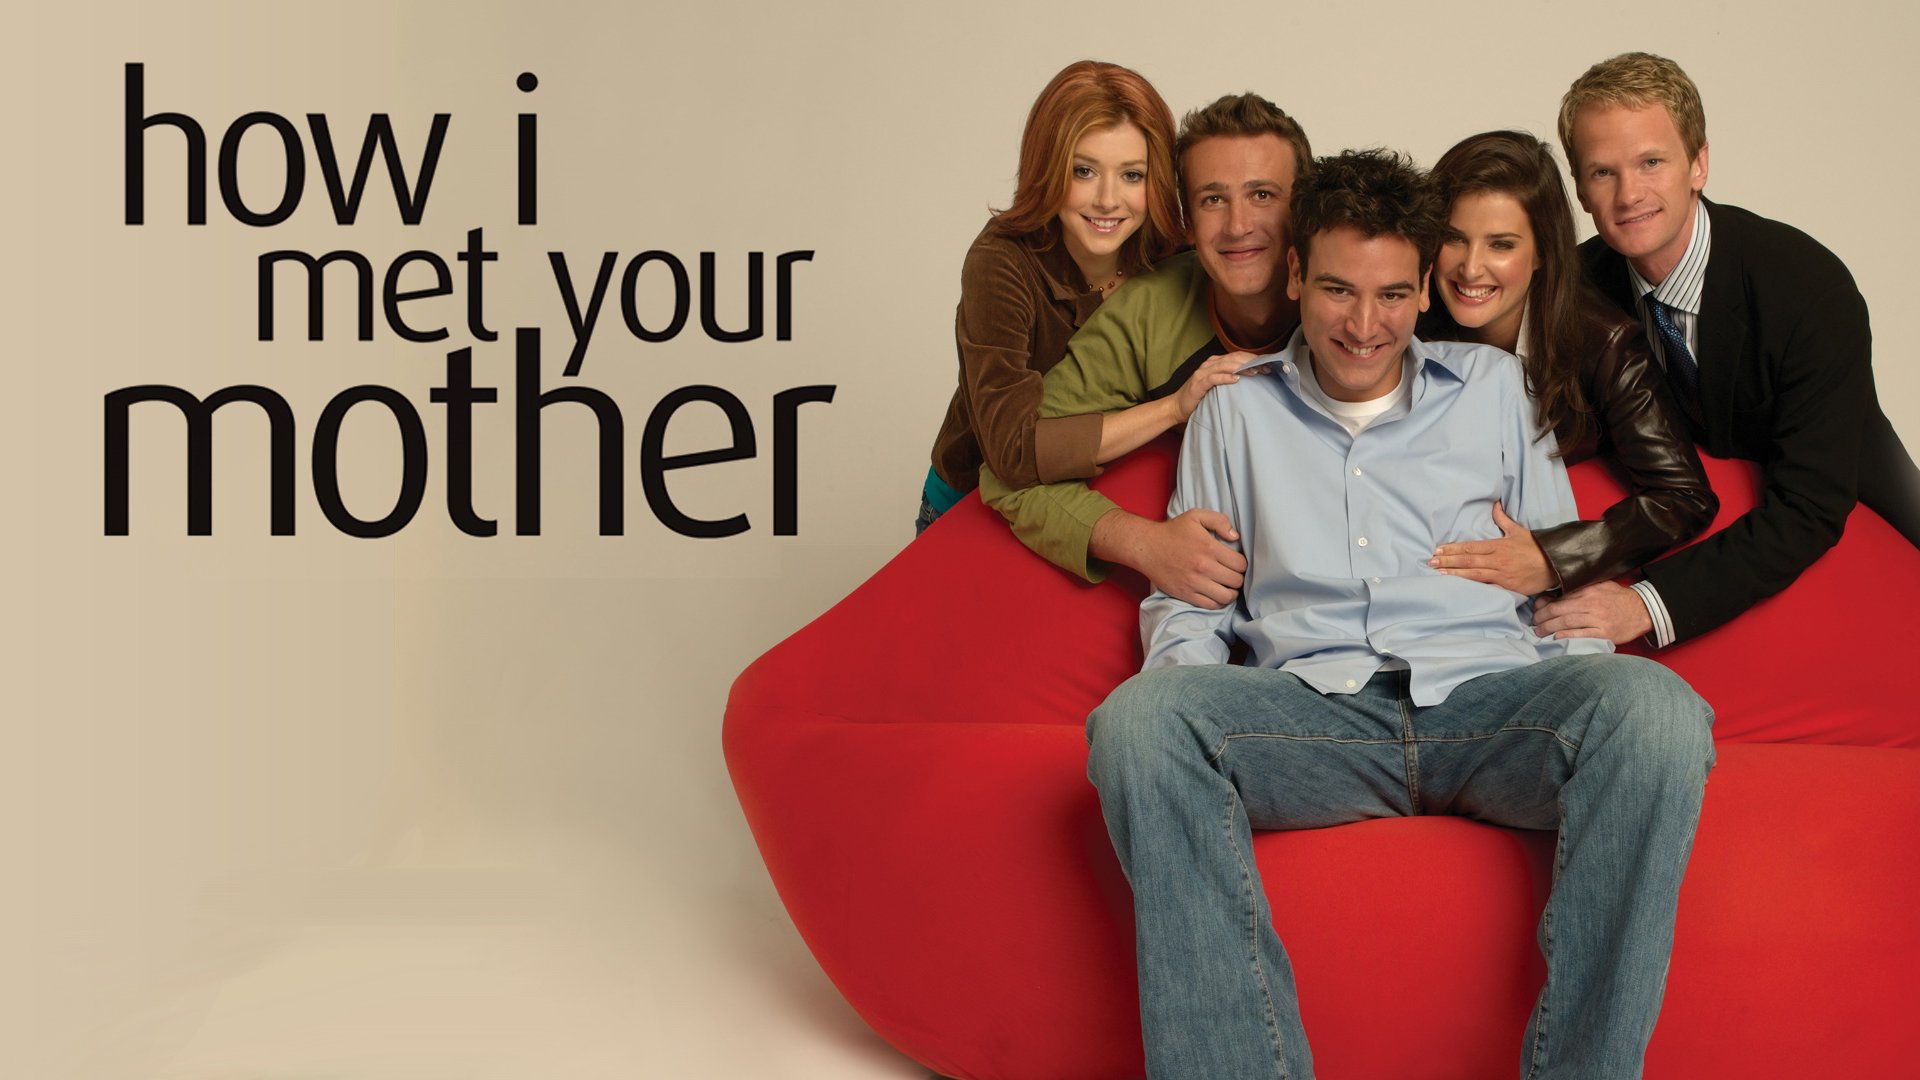 how i met your mother, Comedy, Sitcom, Series, Television, How, Met, Mother,  42 Wallpaper